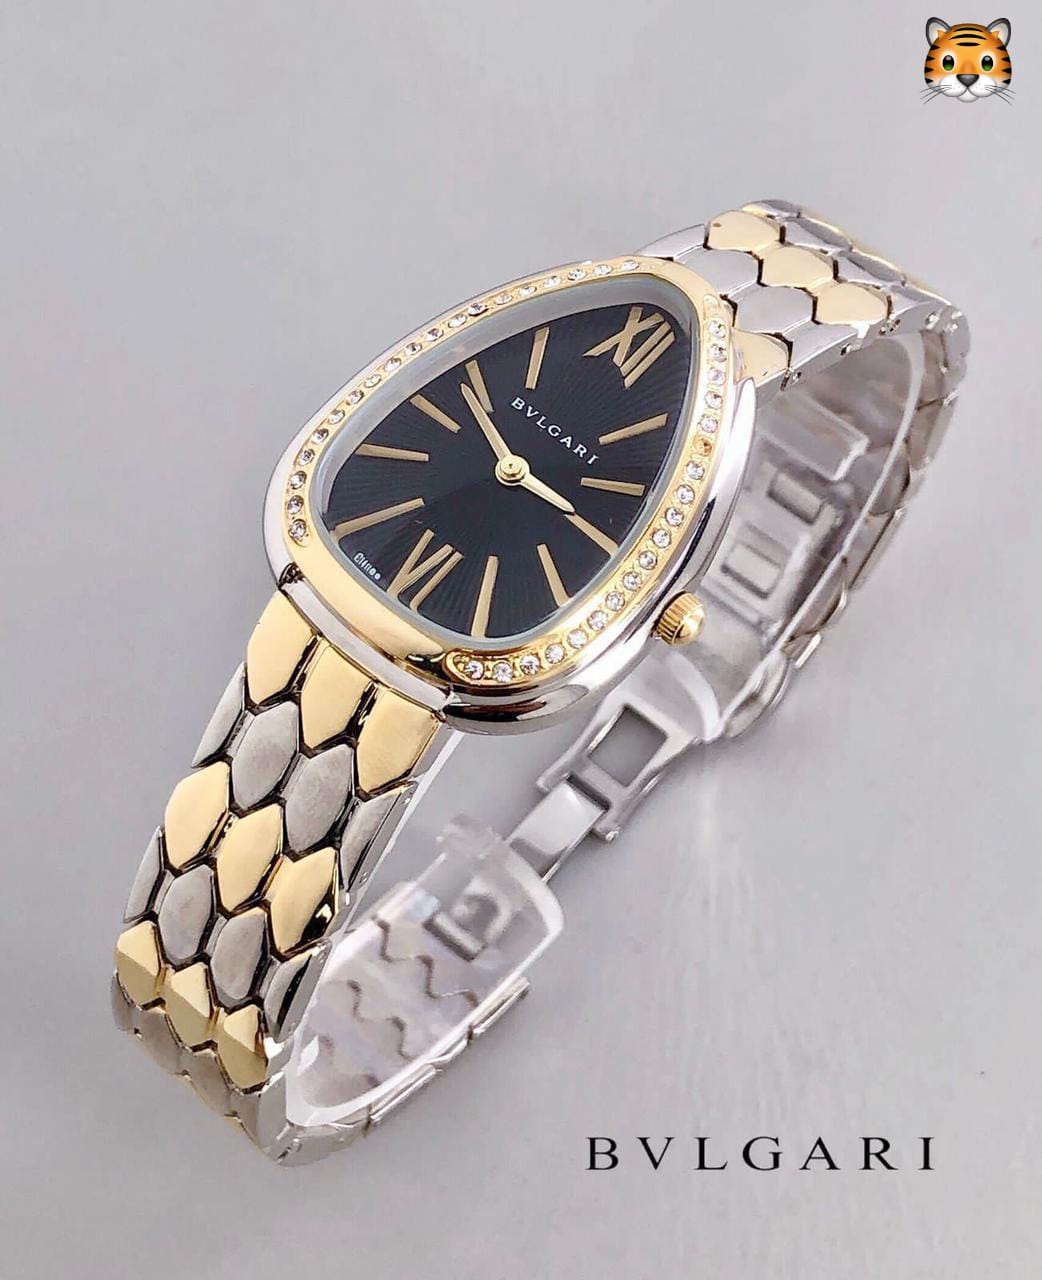 Bvlgari Branded Analog Watch With Silver Metal Case & Strap Watch With Black Dial Designer Gold Multicolor Strap Watch For Girl Or Woman-Best Gift Date Watch- BV-103454